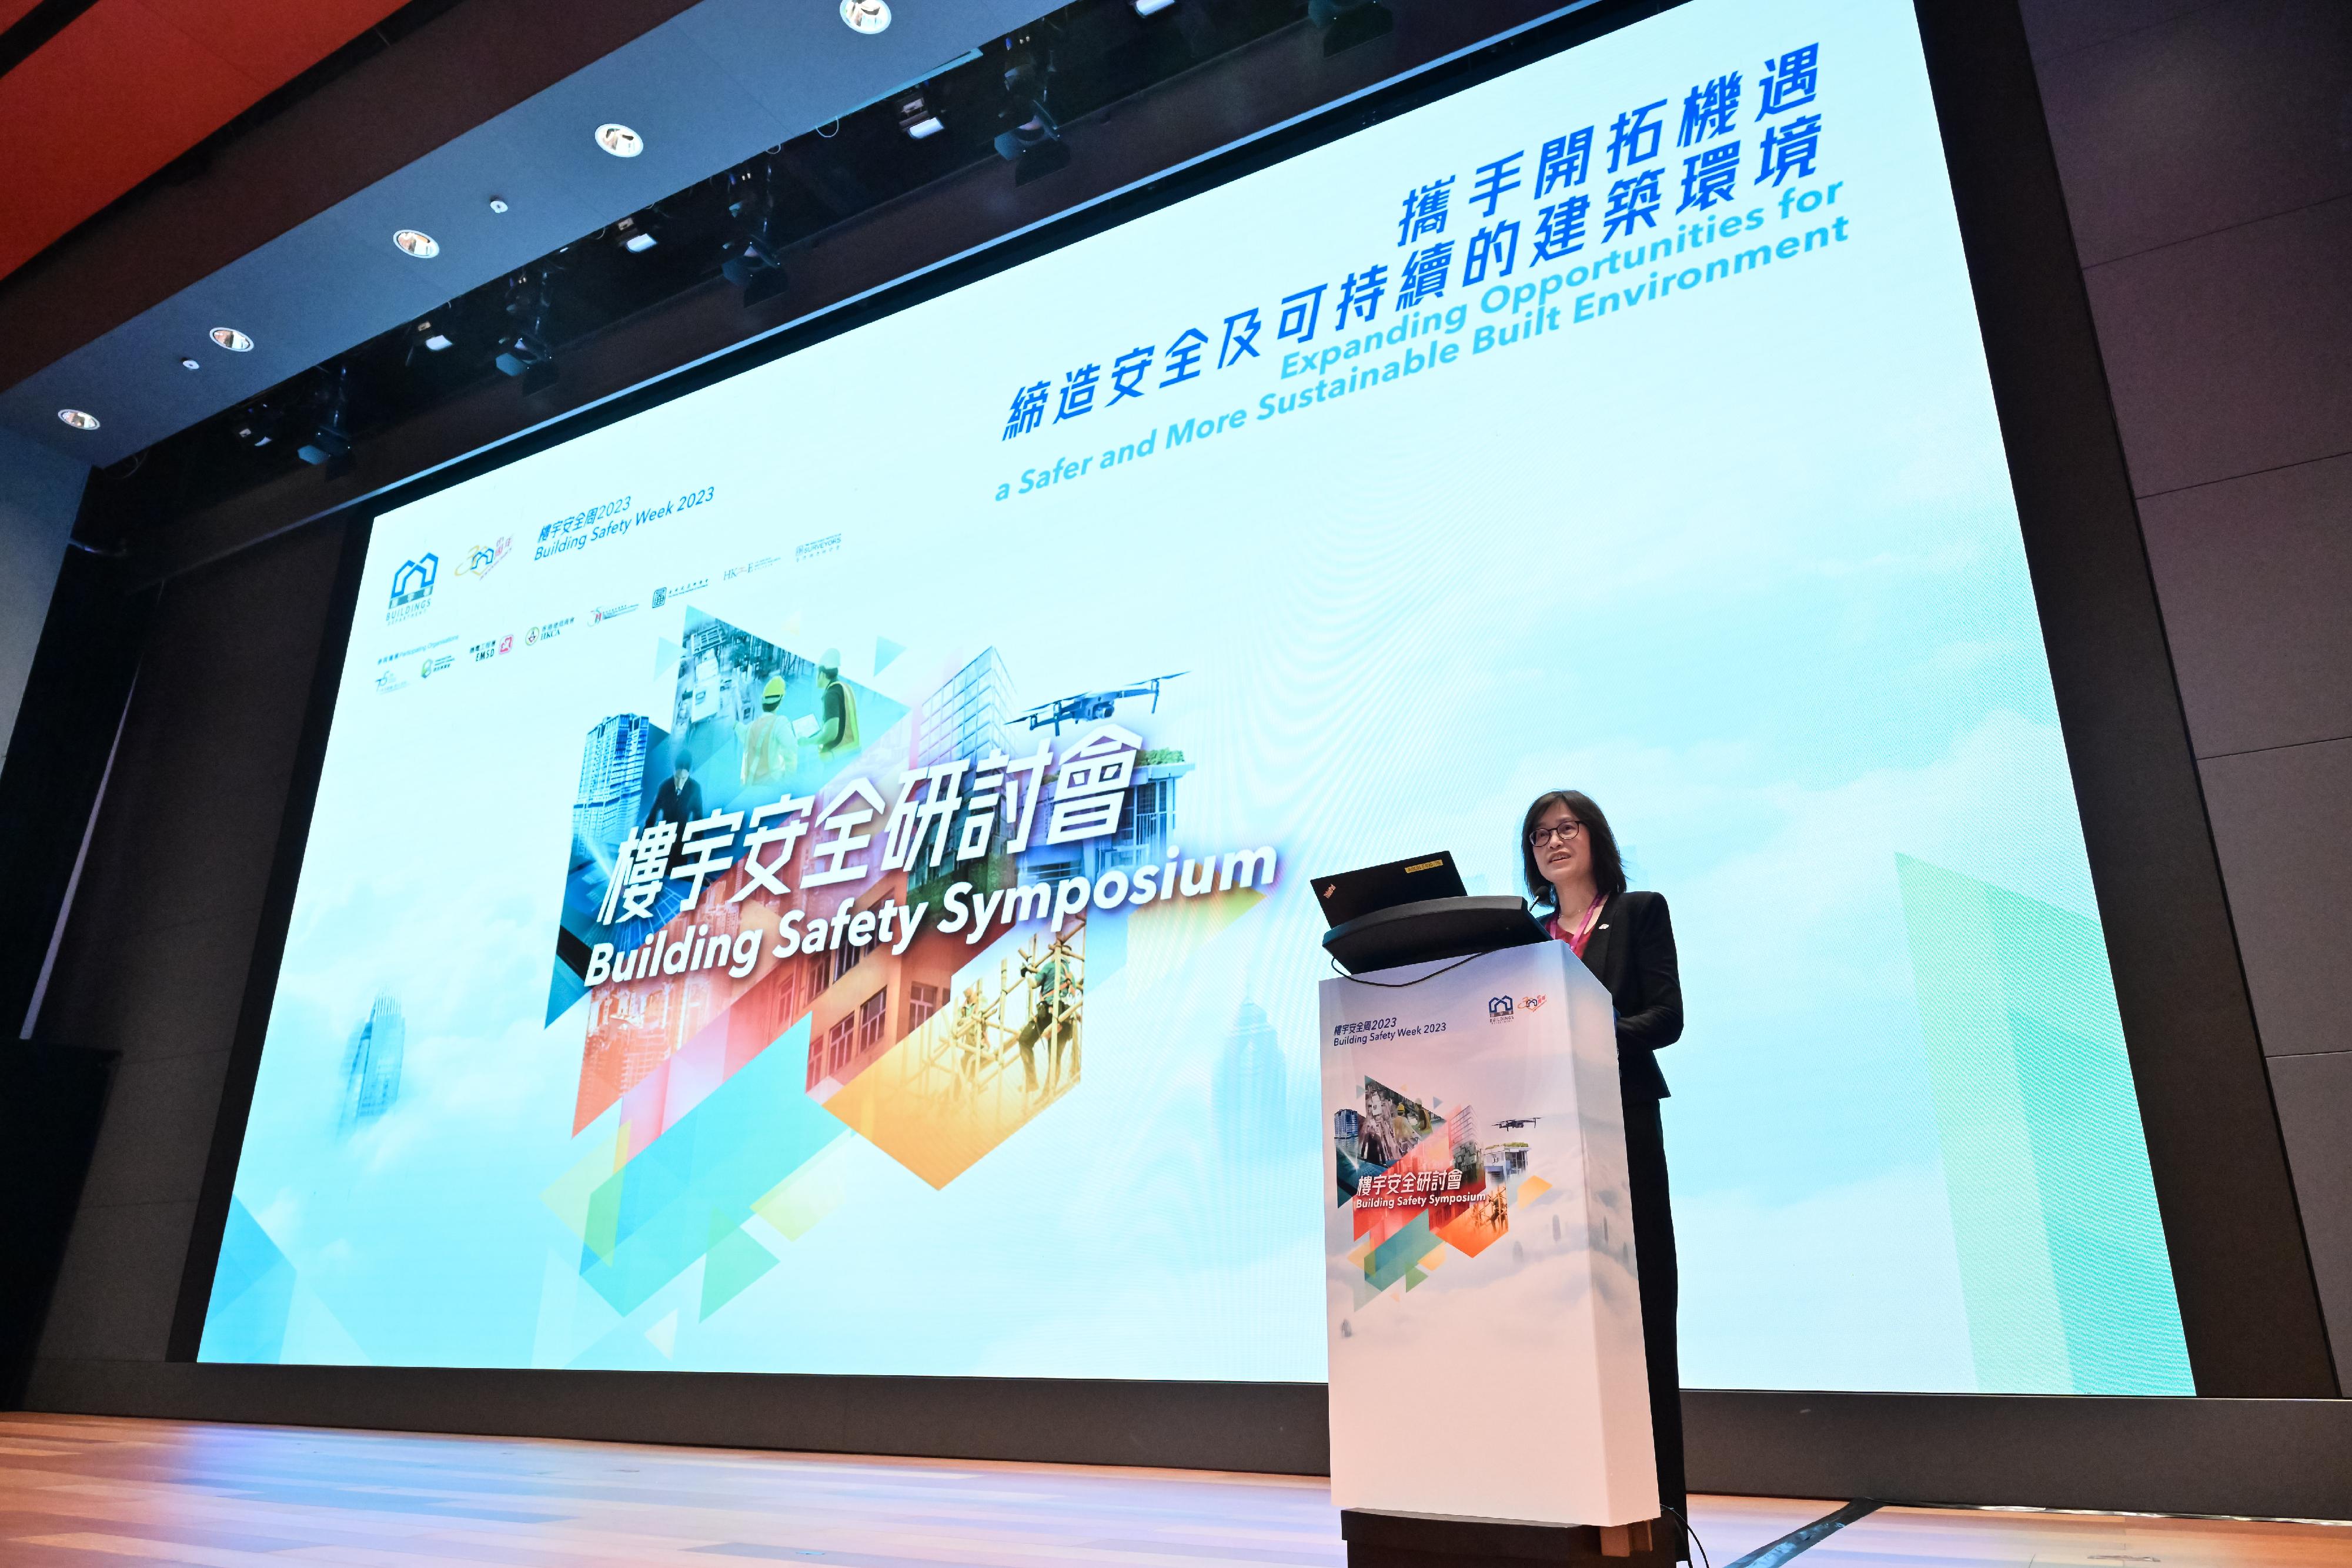 The Buildings Department held the closing event of Building Safety Week 2023, the Building Safety Symposium, at the Hong Kong Palace Museum today (October 27). Photo shows the Director of Buildings, Ms Clarice Yu, giving a welcome speech at the symposium.